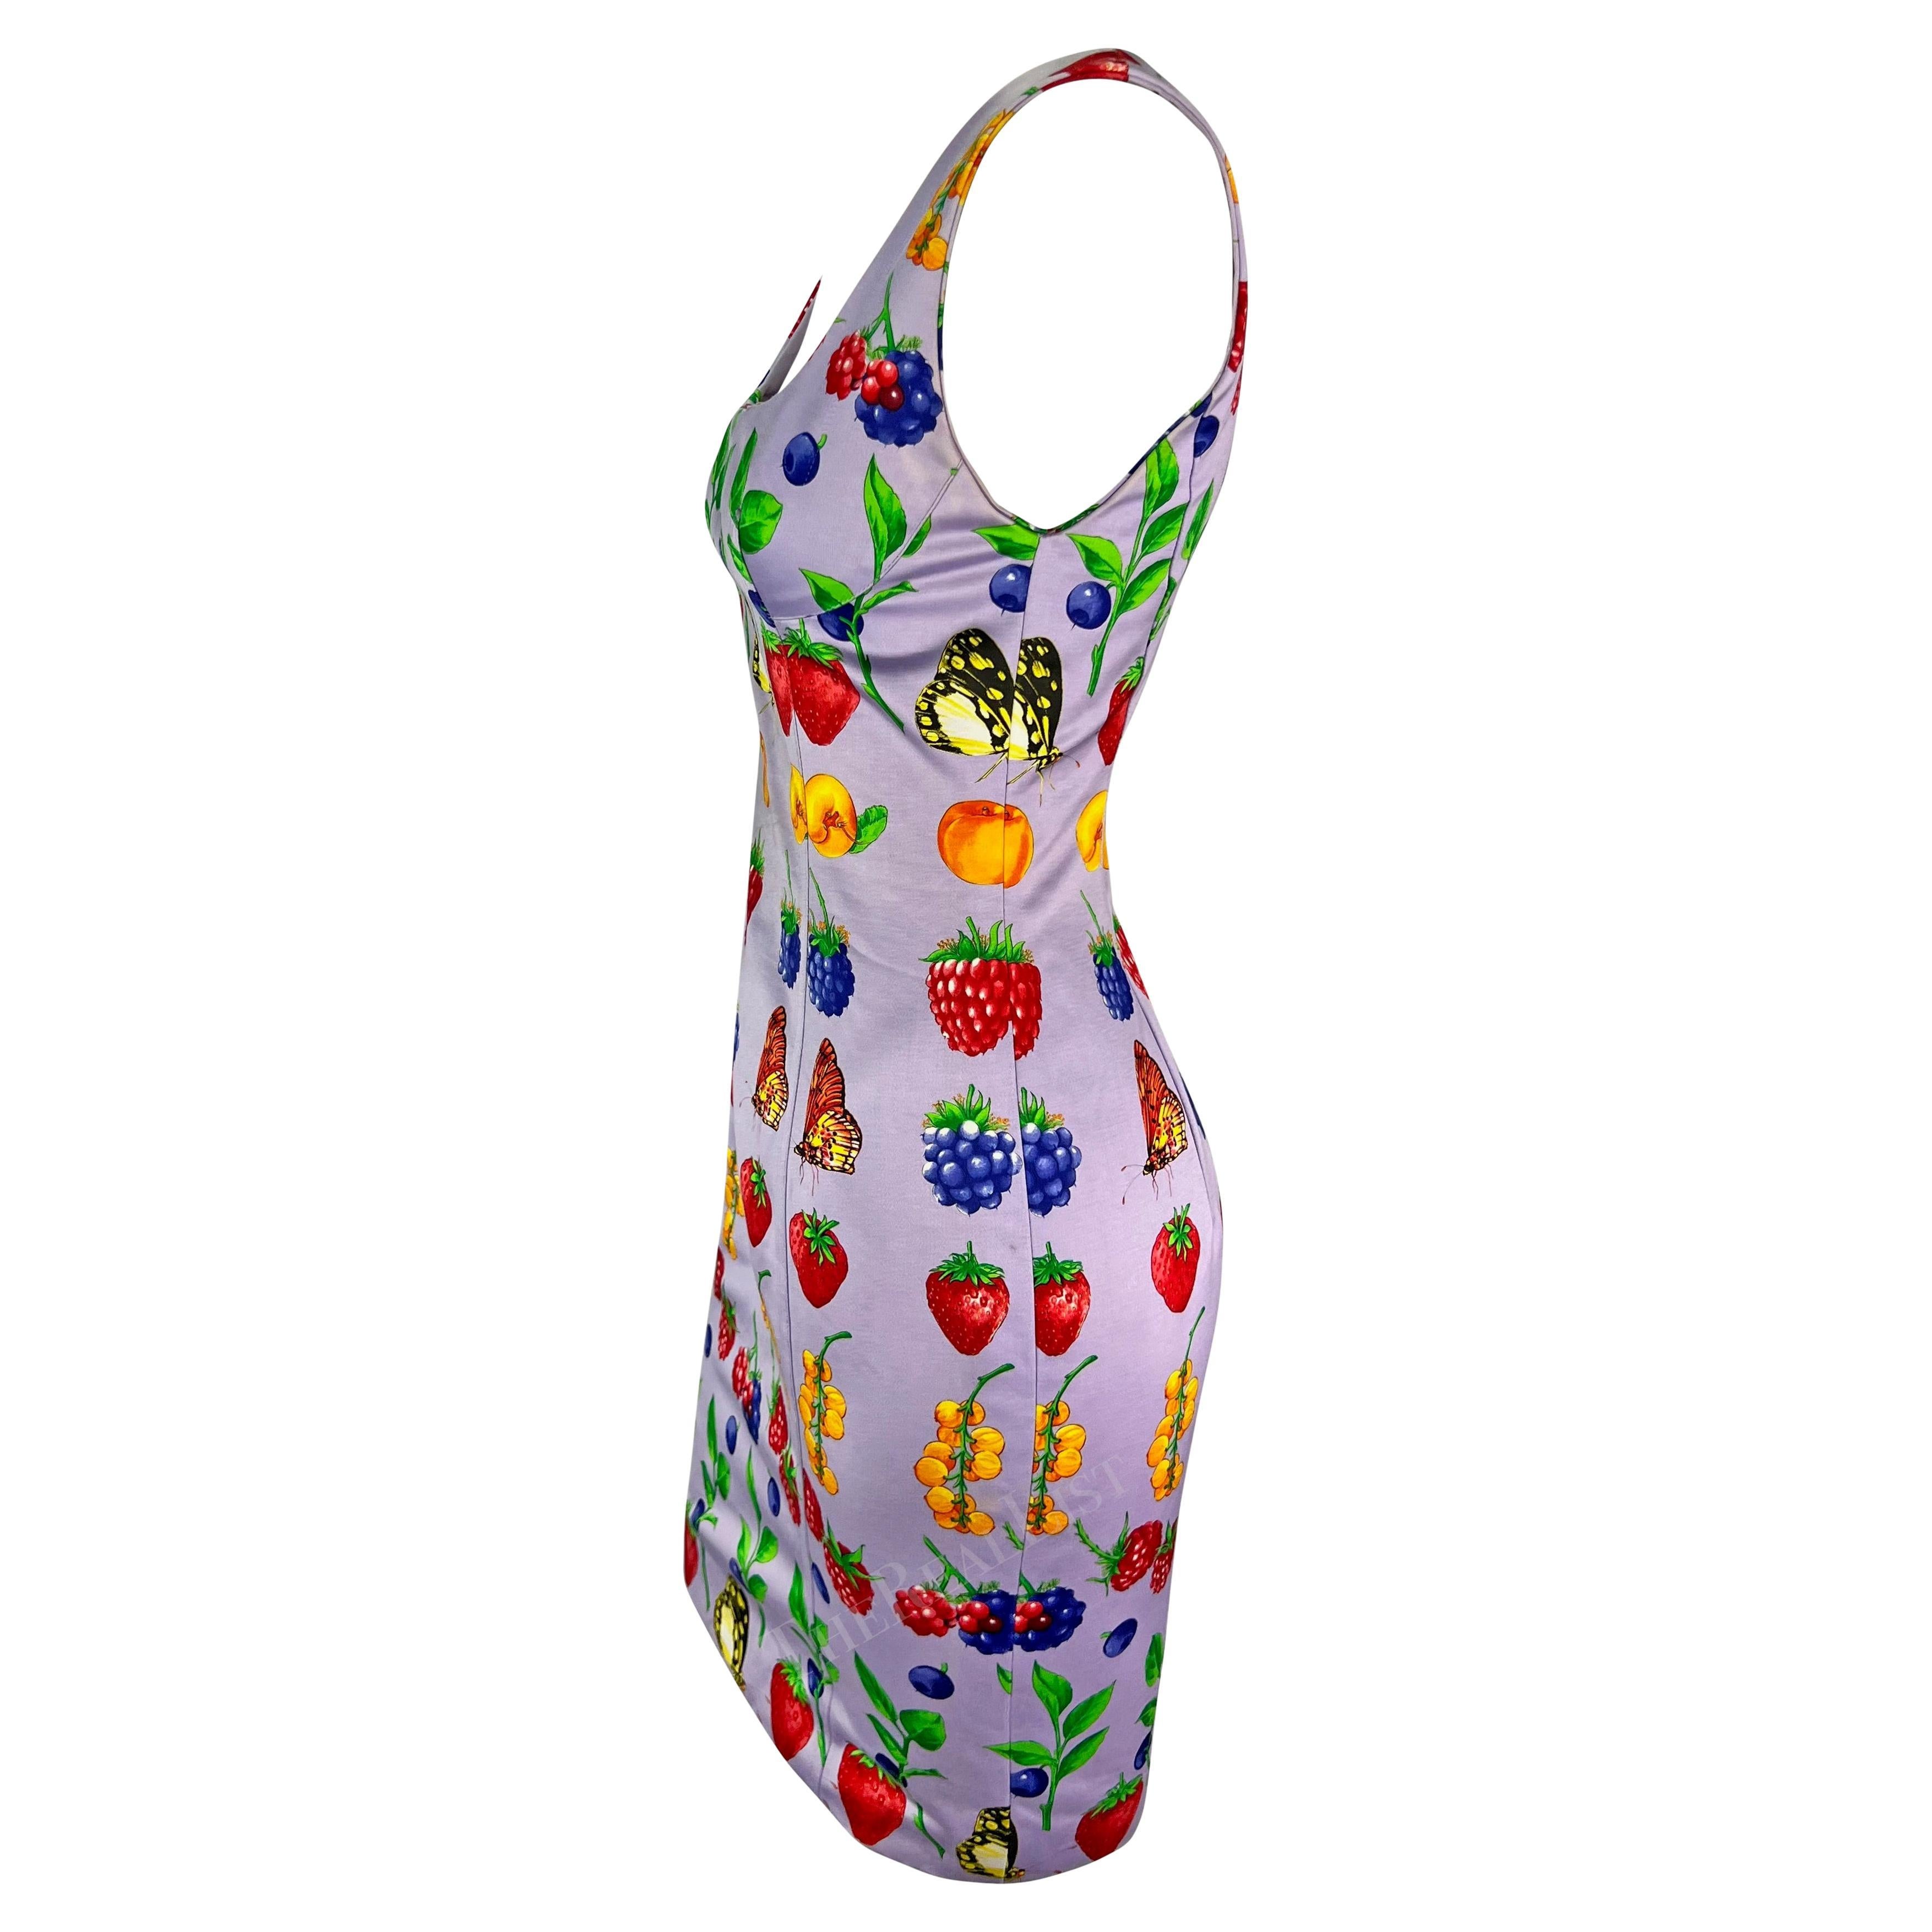 S/S 1995 Gianni Versace Butterfly Berry Garden Print Lavender Pencil Dress In Excellent Condition For Sale In West Hollywood, CA